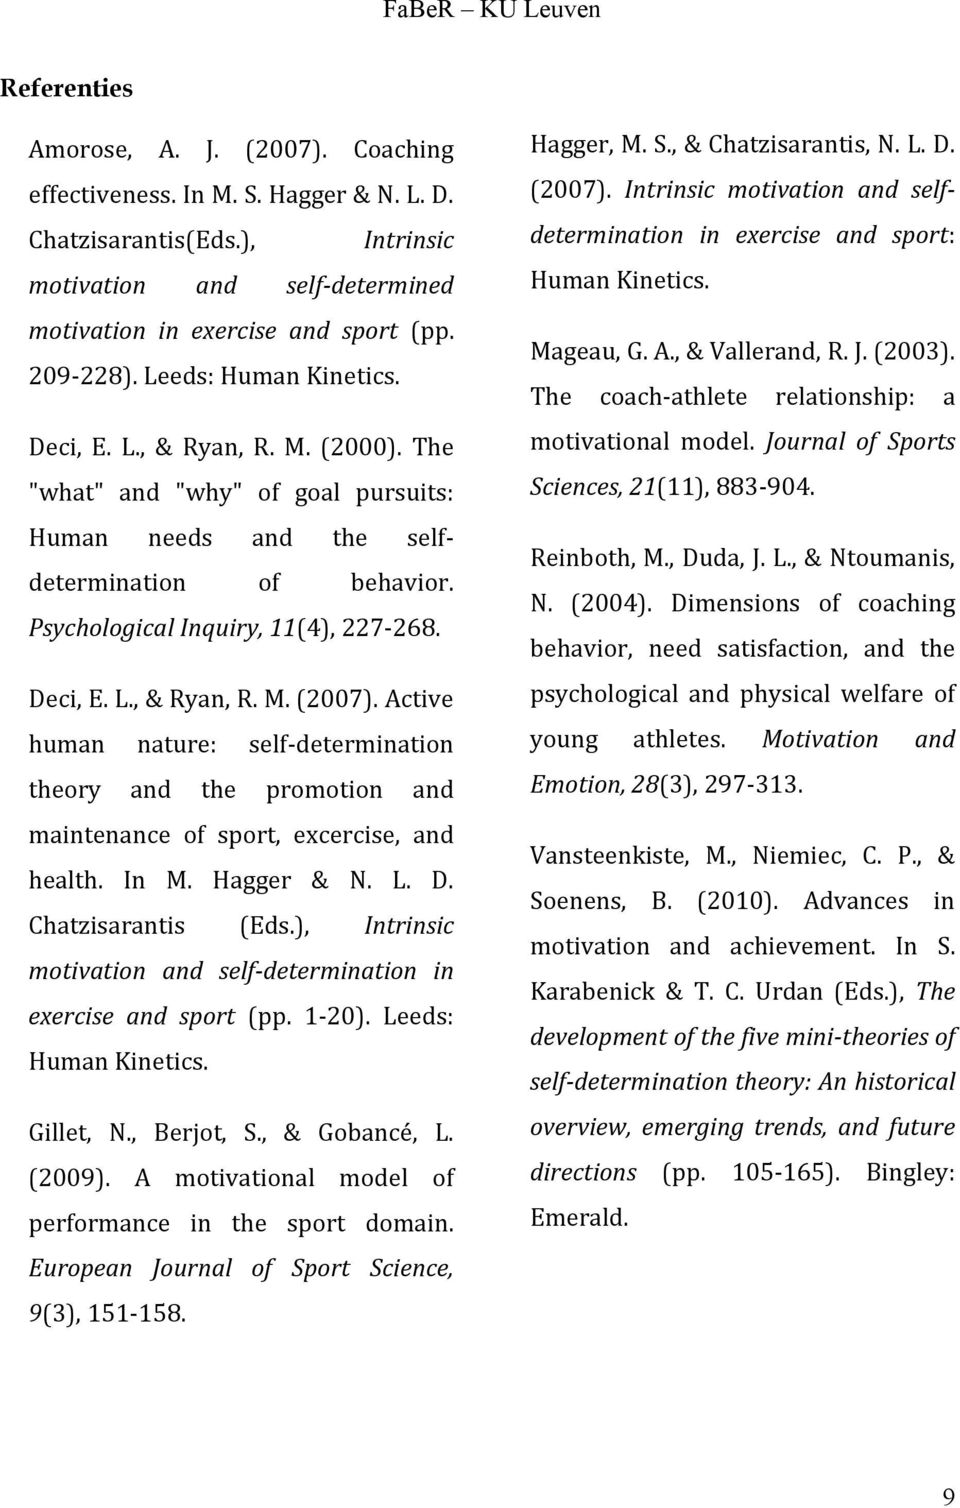 Active human nature: self-determination theory and the promotion and maintenance of sport, excercise, and health. In M. Hagger & N. L. D. Chatzisarantis (Eds.